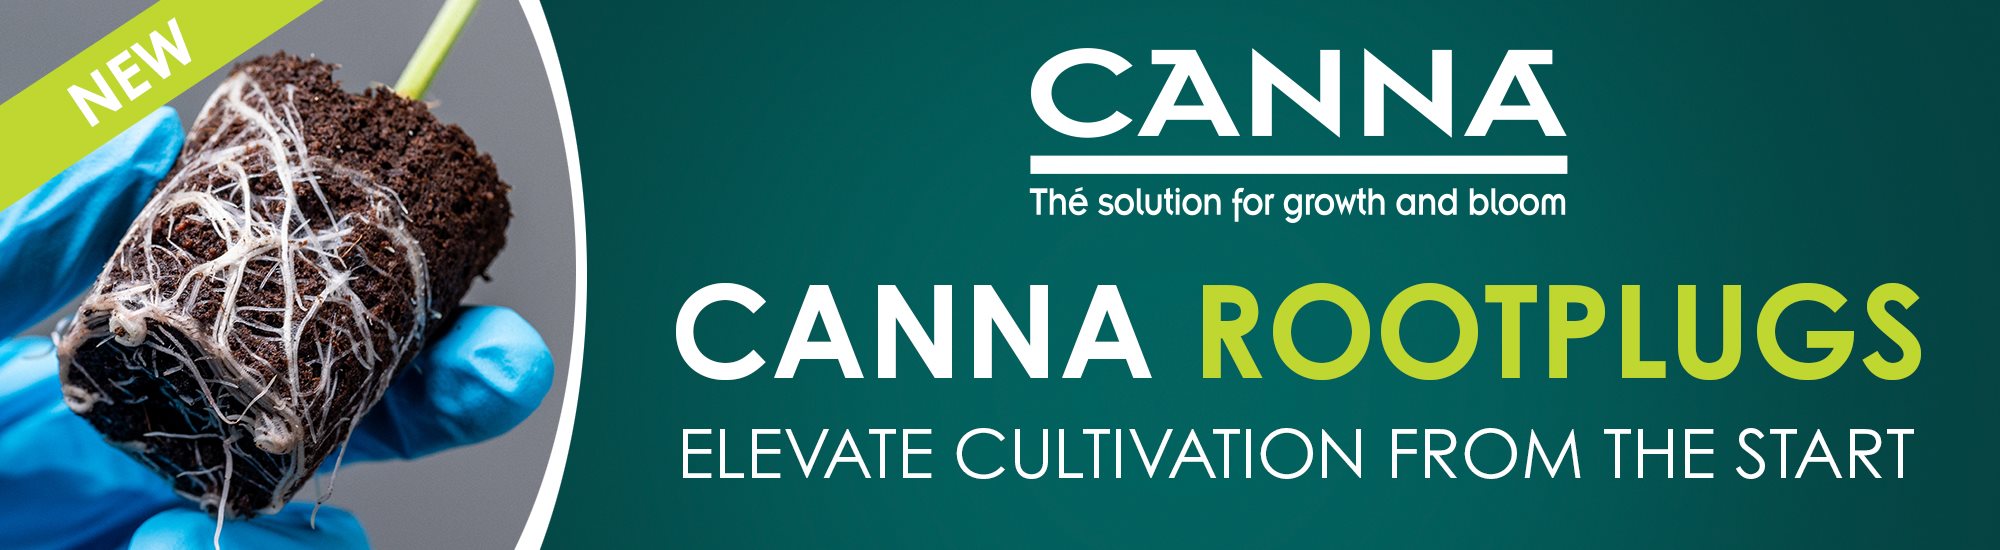 CANNA ROOTPLUGS WEB BANNER - ENG - BioFloral East